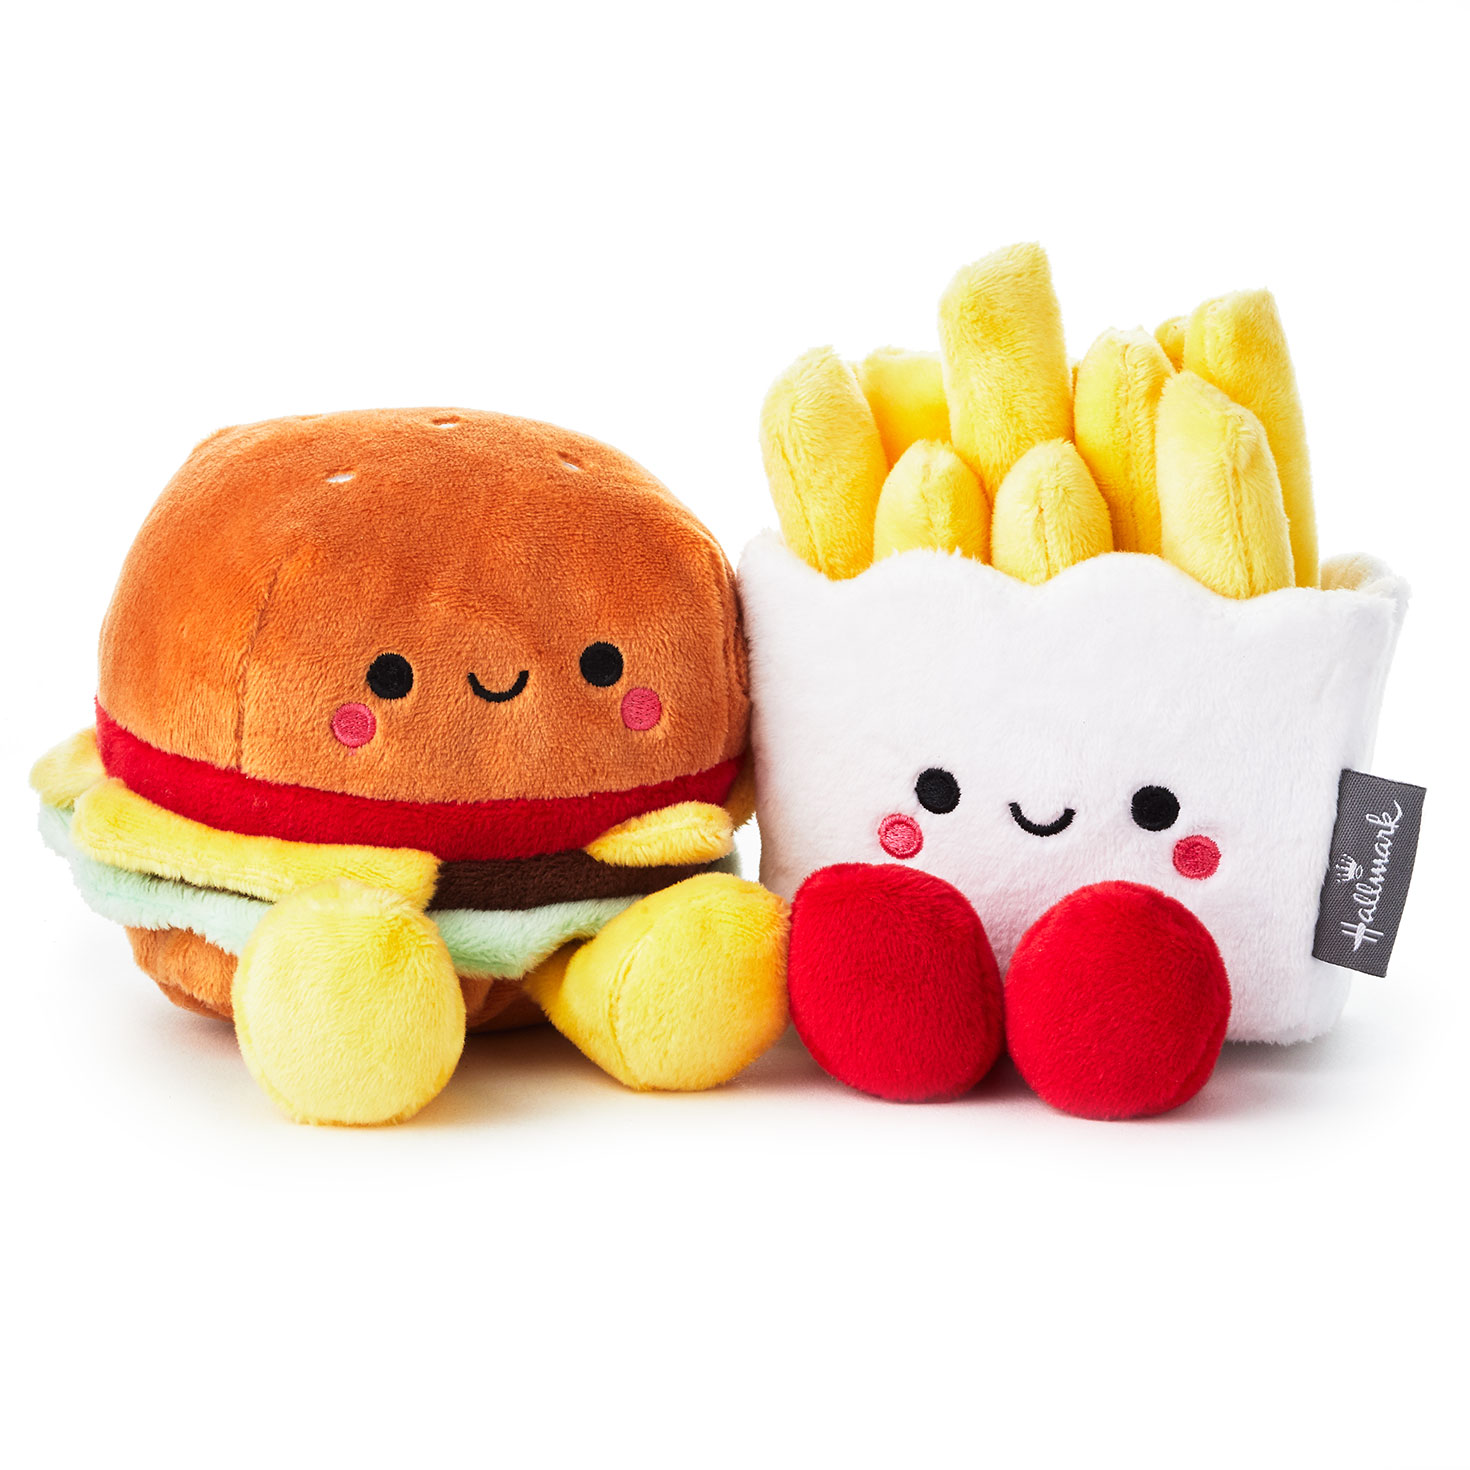 Food Series Plush Toy French Fries for Adults, Kids, Birthday